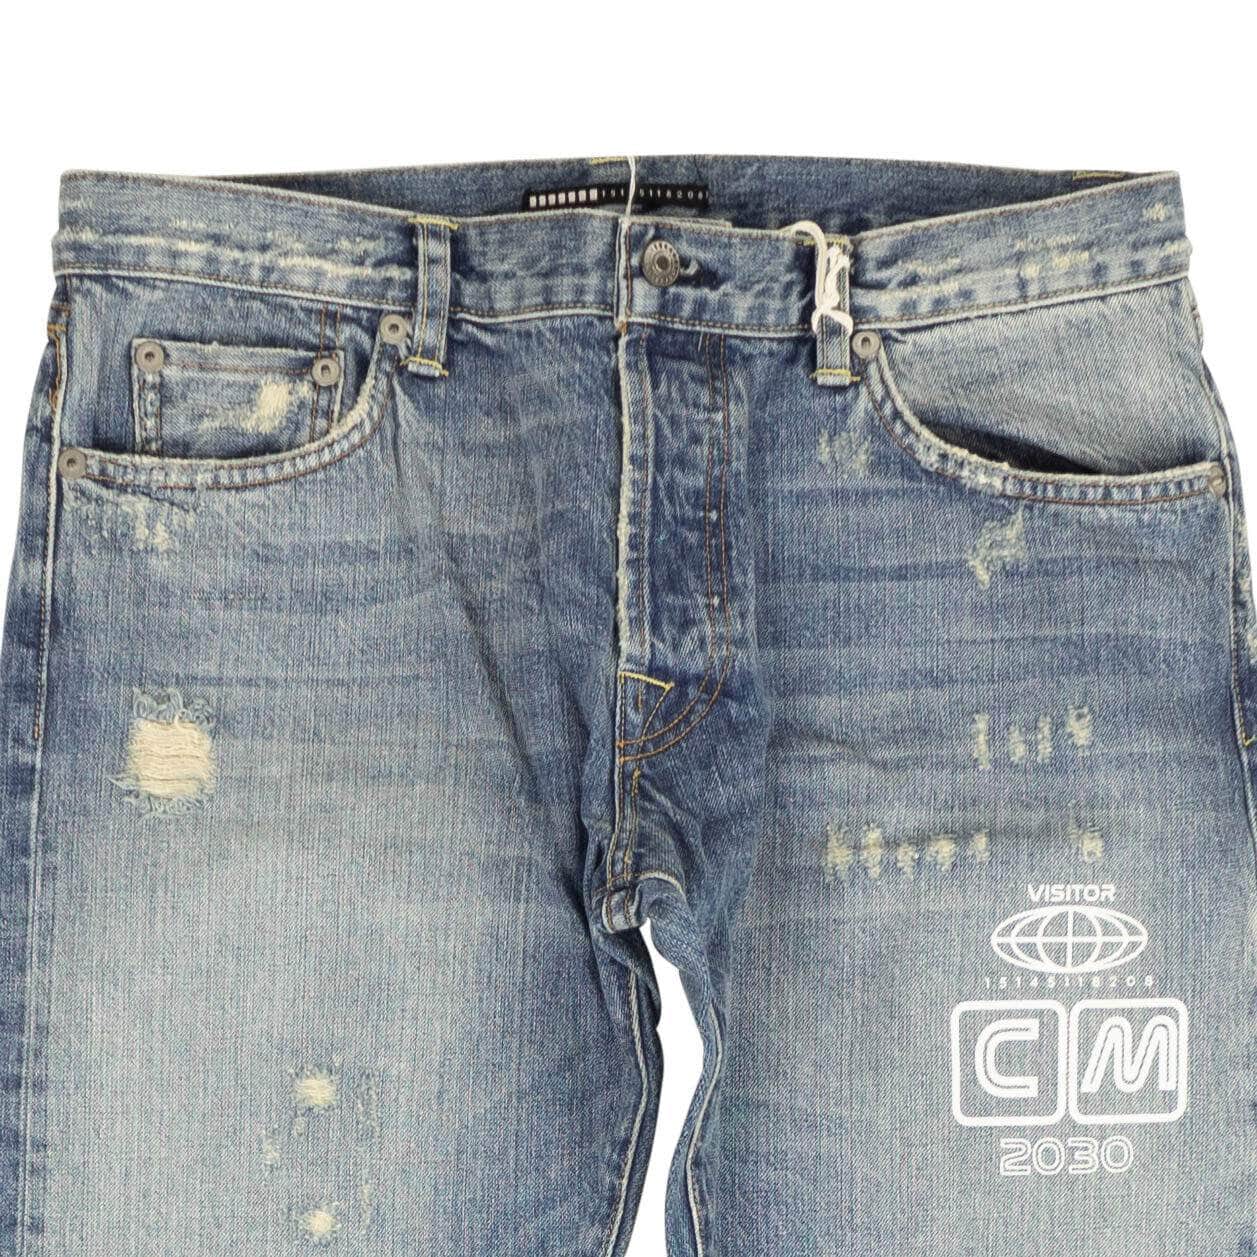 Inactive 250-500, channelenable-all, chicmi, couponcollection, gender-mens, inactive, main-clothing, mens-shoes, mens-slim-fit-jeans, size-28, size-31, size-32, size-33, size-34, size-36 Blue Distressed White Logo Denim Jeans